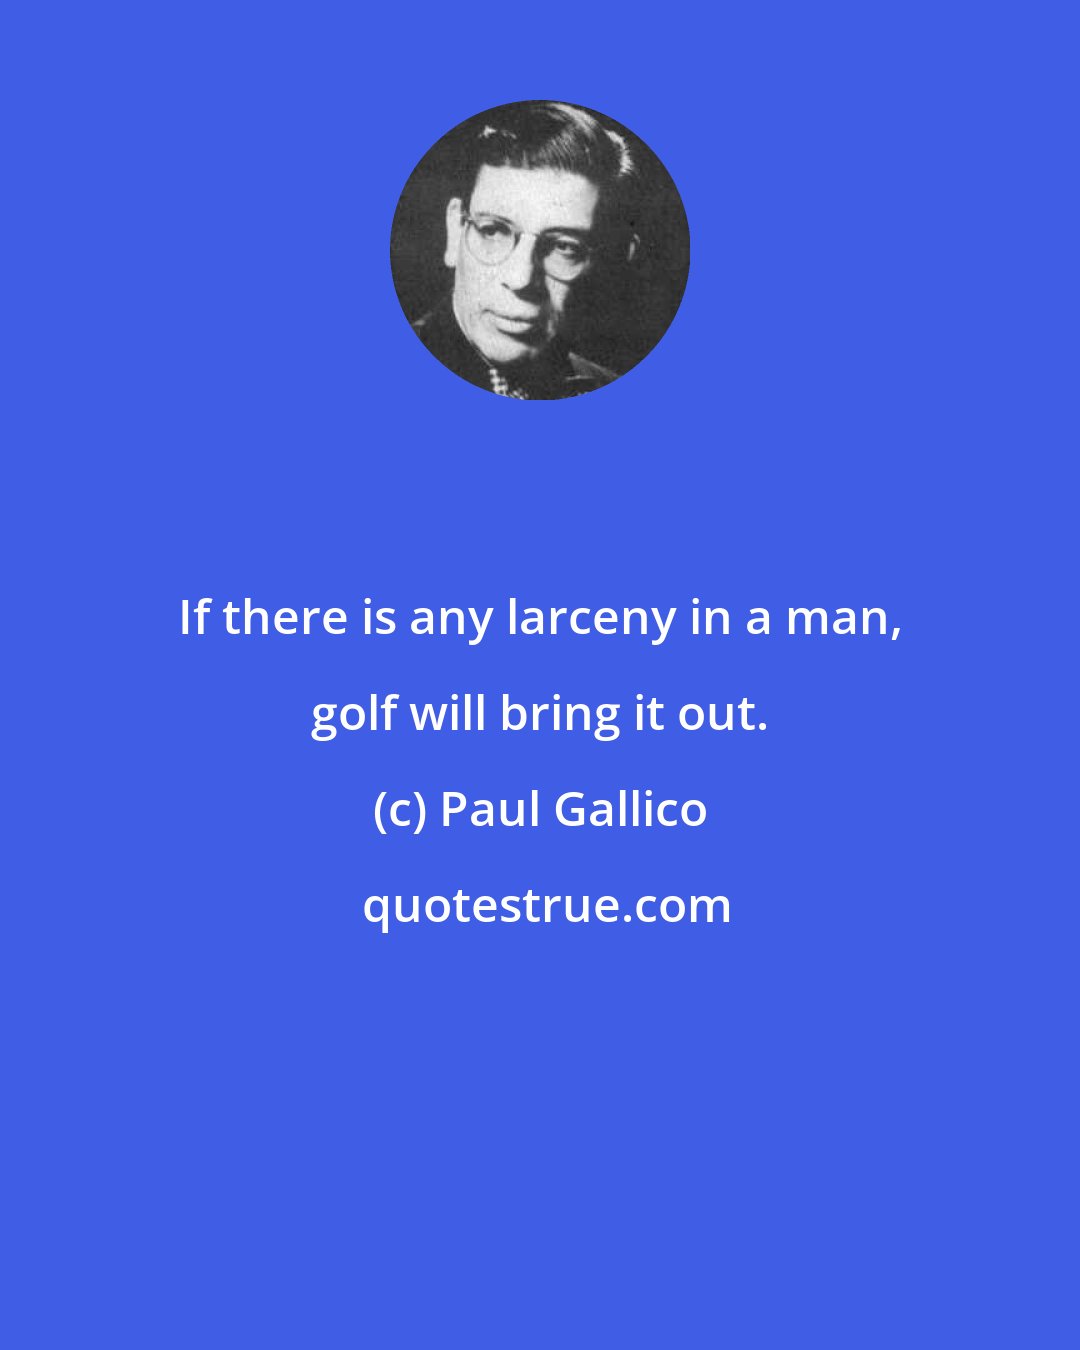 Paul Gallico: If there is any larceny in a man, golf will bring it out.